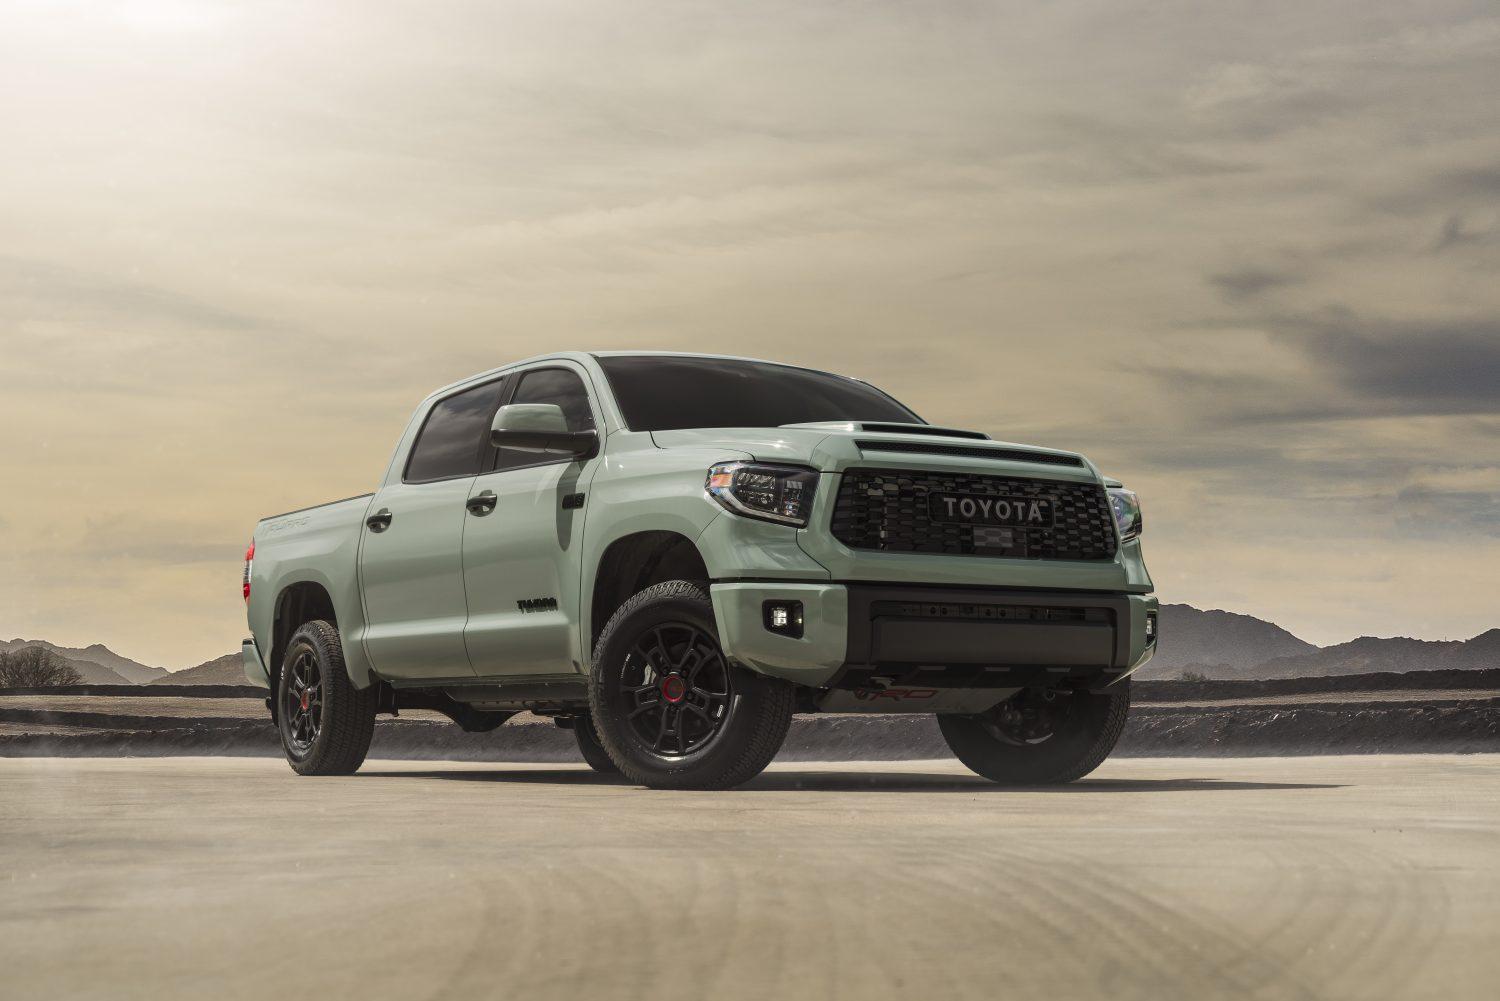 The Toyota Tundra has always had a great reputation for reliability.